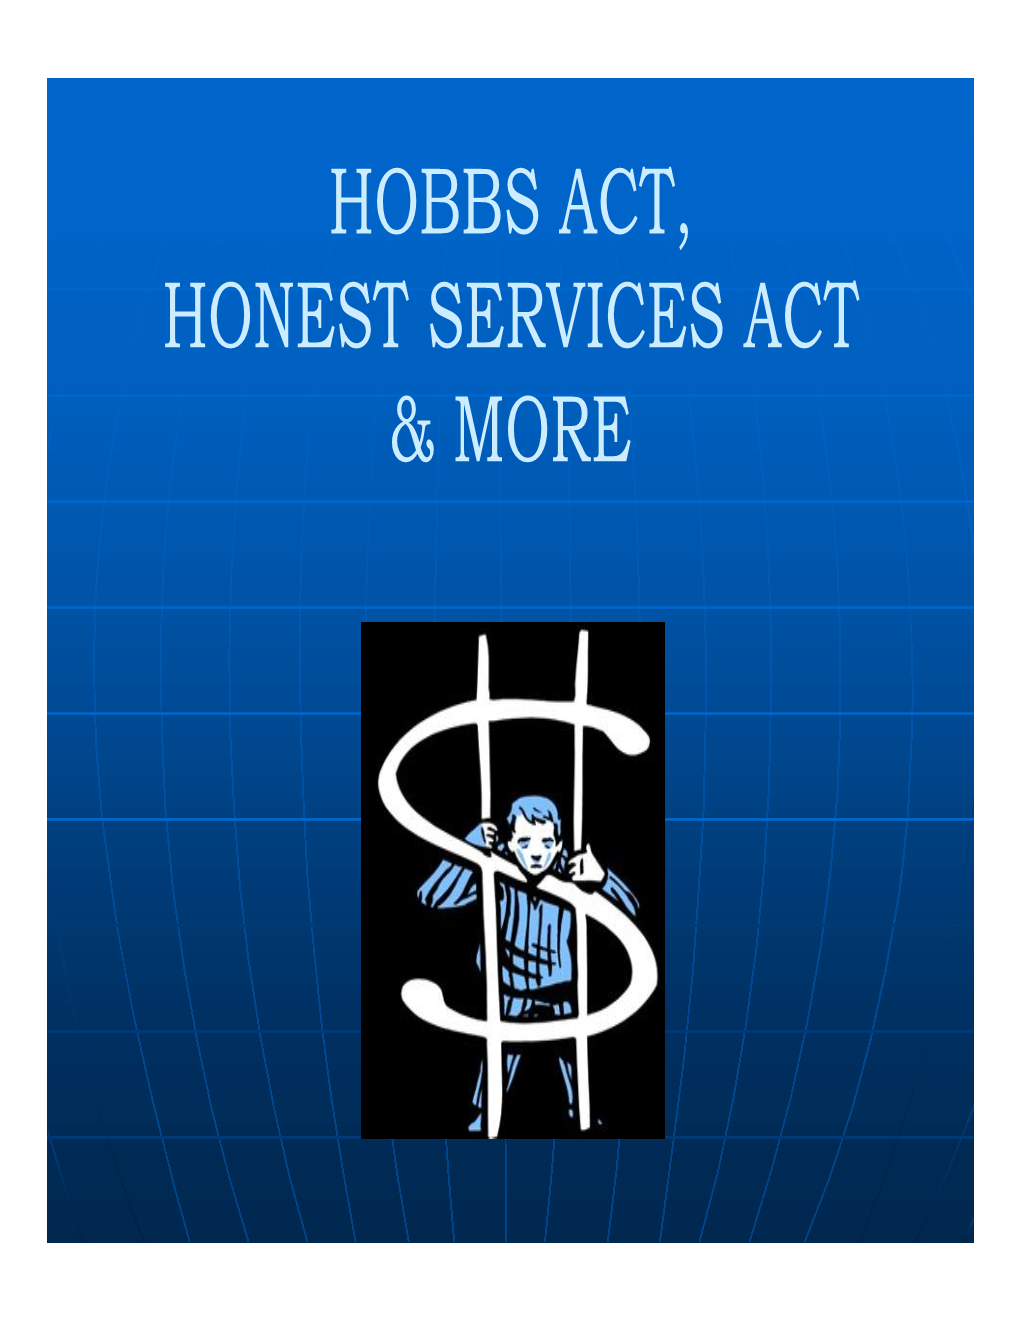 Hobbs Act, Honest Services Act & More